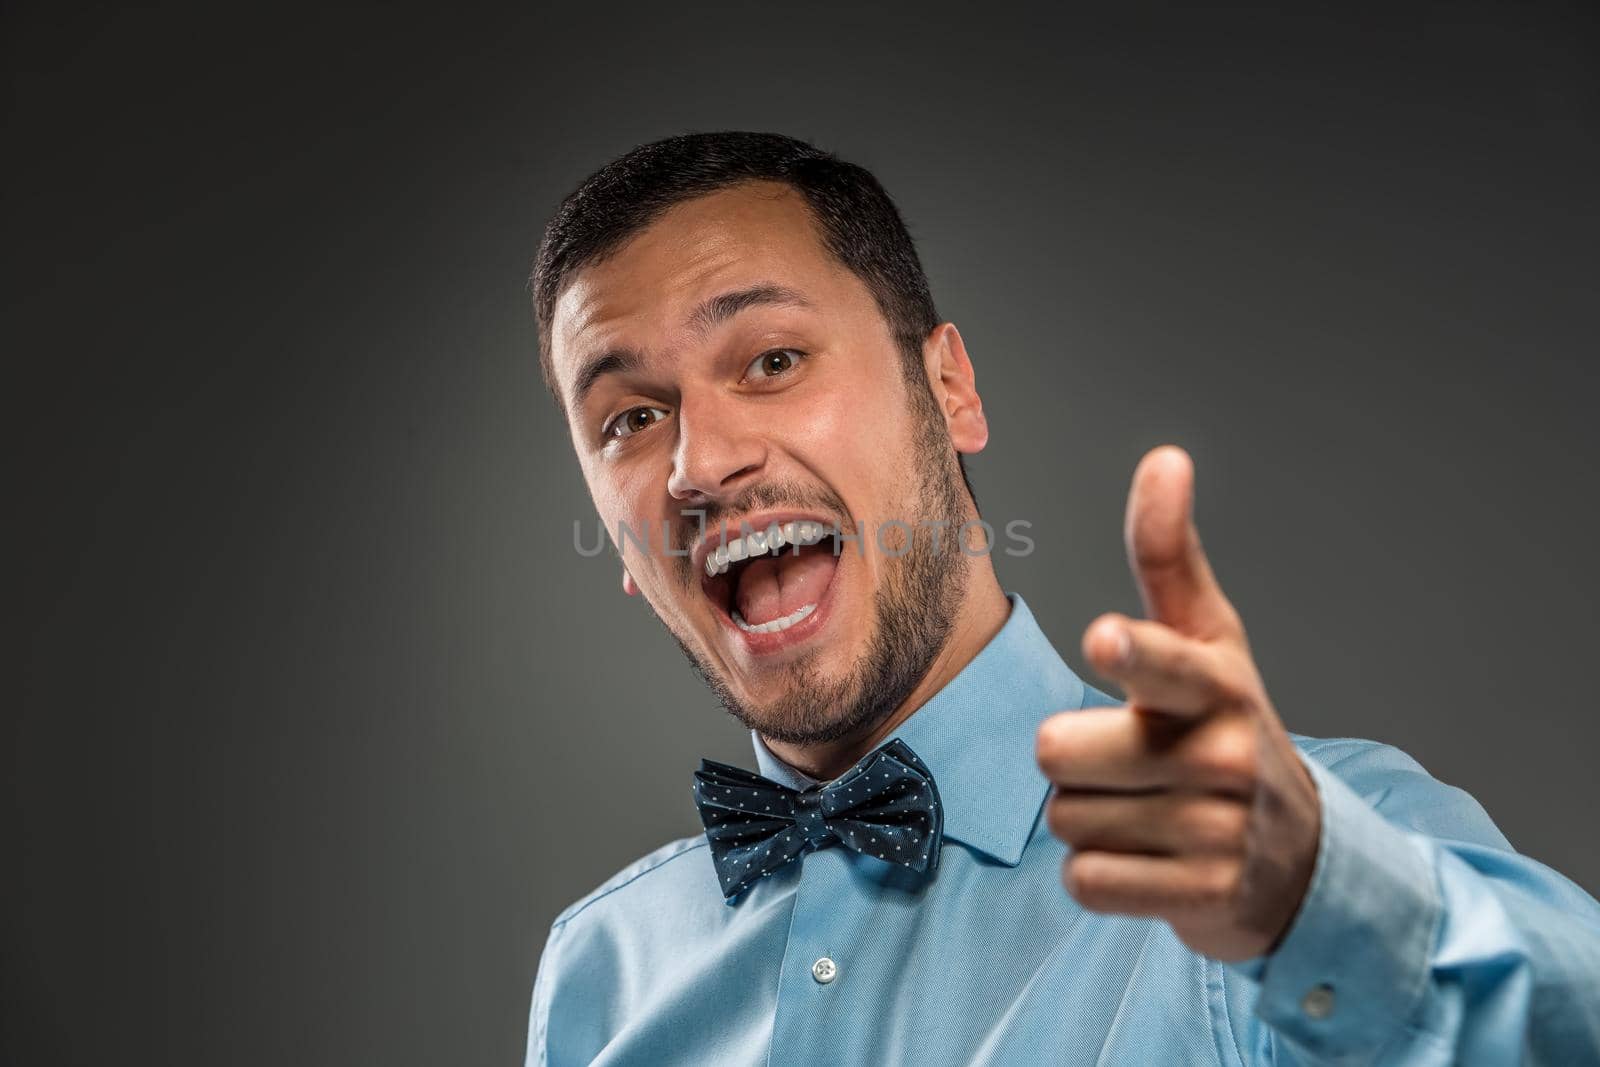 Closeup portrait of excited, energetic, happy, smiling man in blue shirt and butterfly tie is gesturing with his hand, pointing finger at camera isolated on gray background. Positive human emotion facial expression